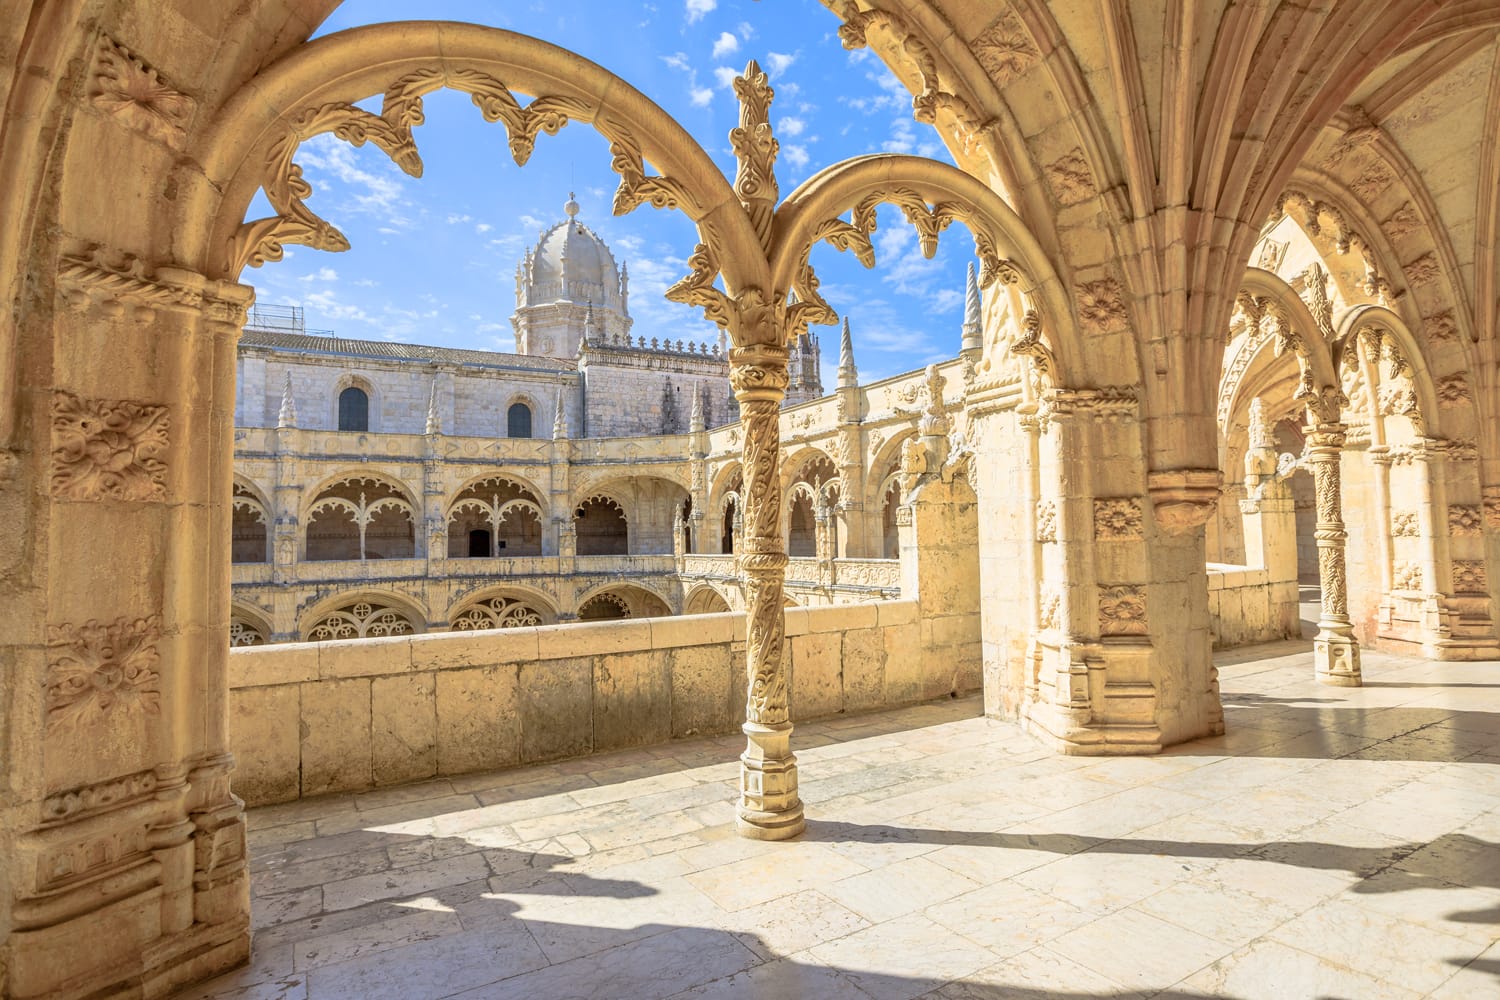 Beautiful reticulated vaulting on courtyard or cloisters of Hieronymites Monastery, Mosteiro dos Jeronimos, famous Lisbon landmark in Belem district and Unesco Heritage.